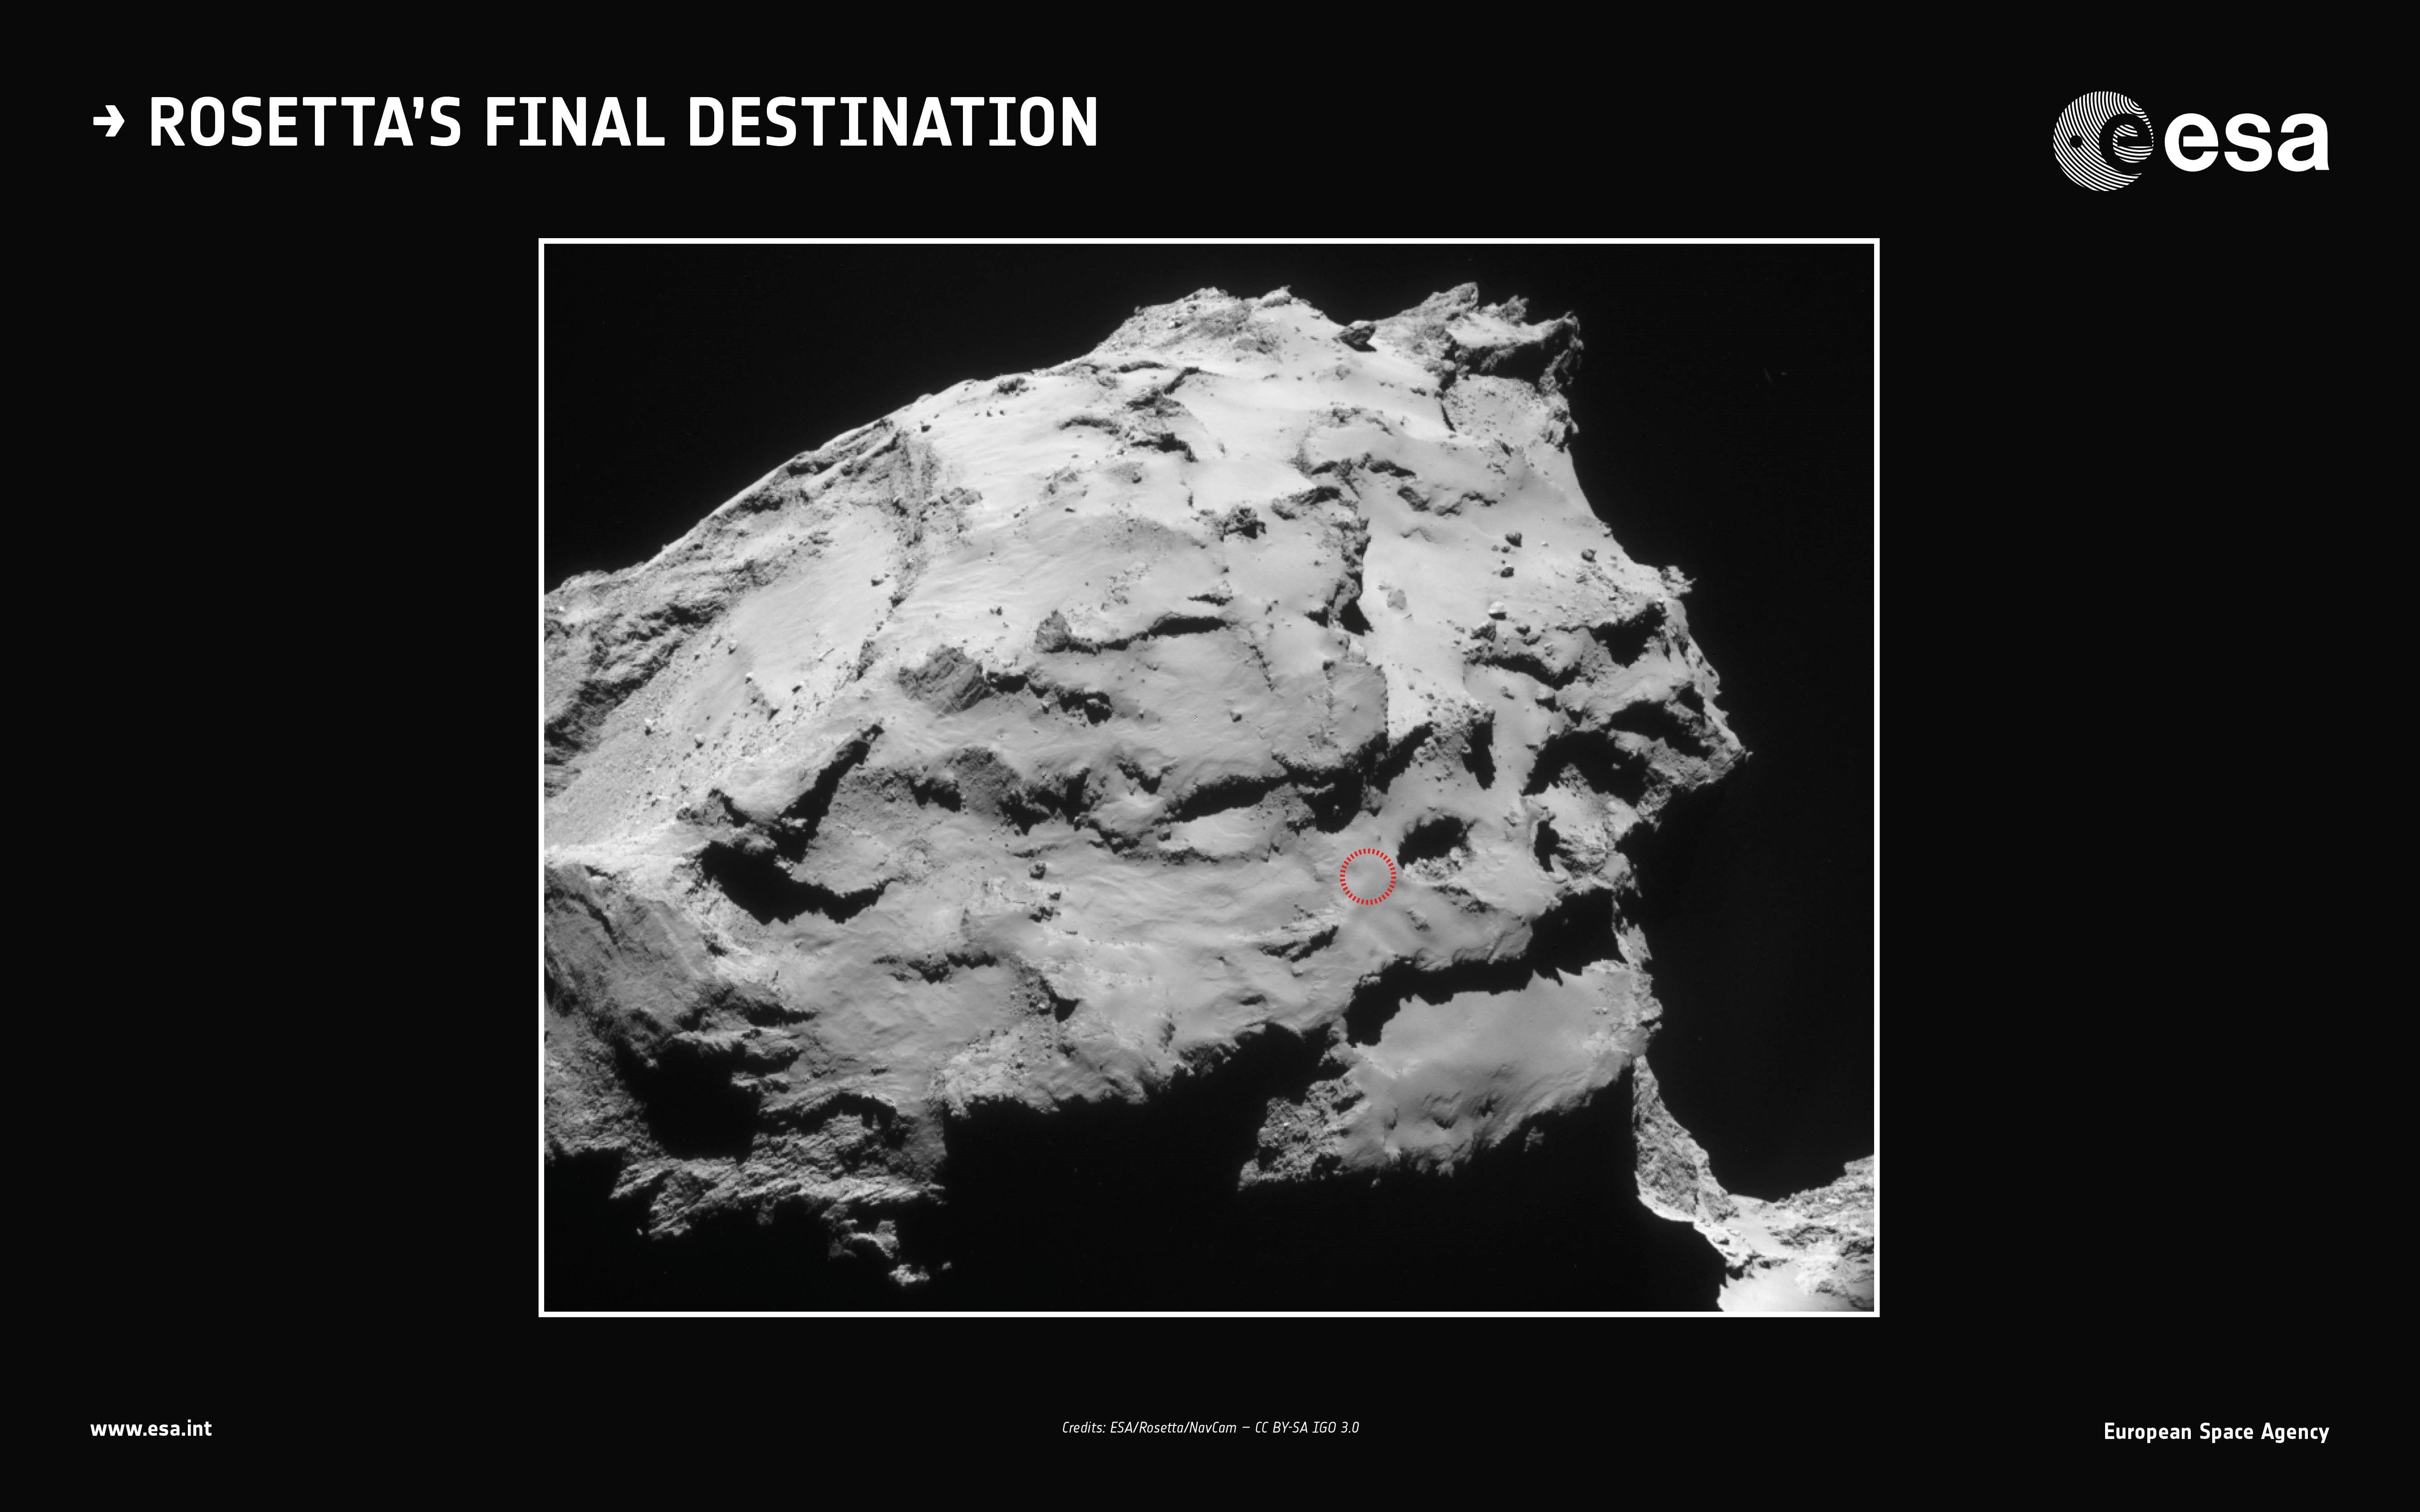 Rosetta Comet Spacecraft Is About to Plunge to Its Death